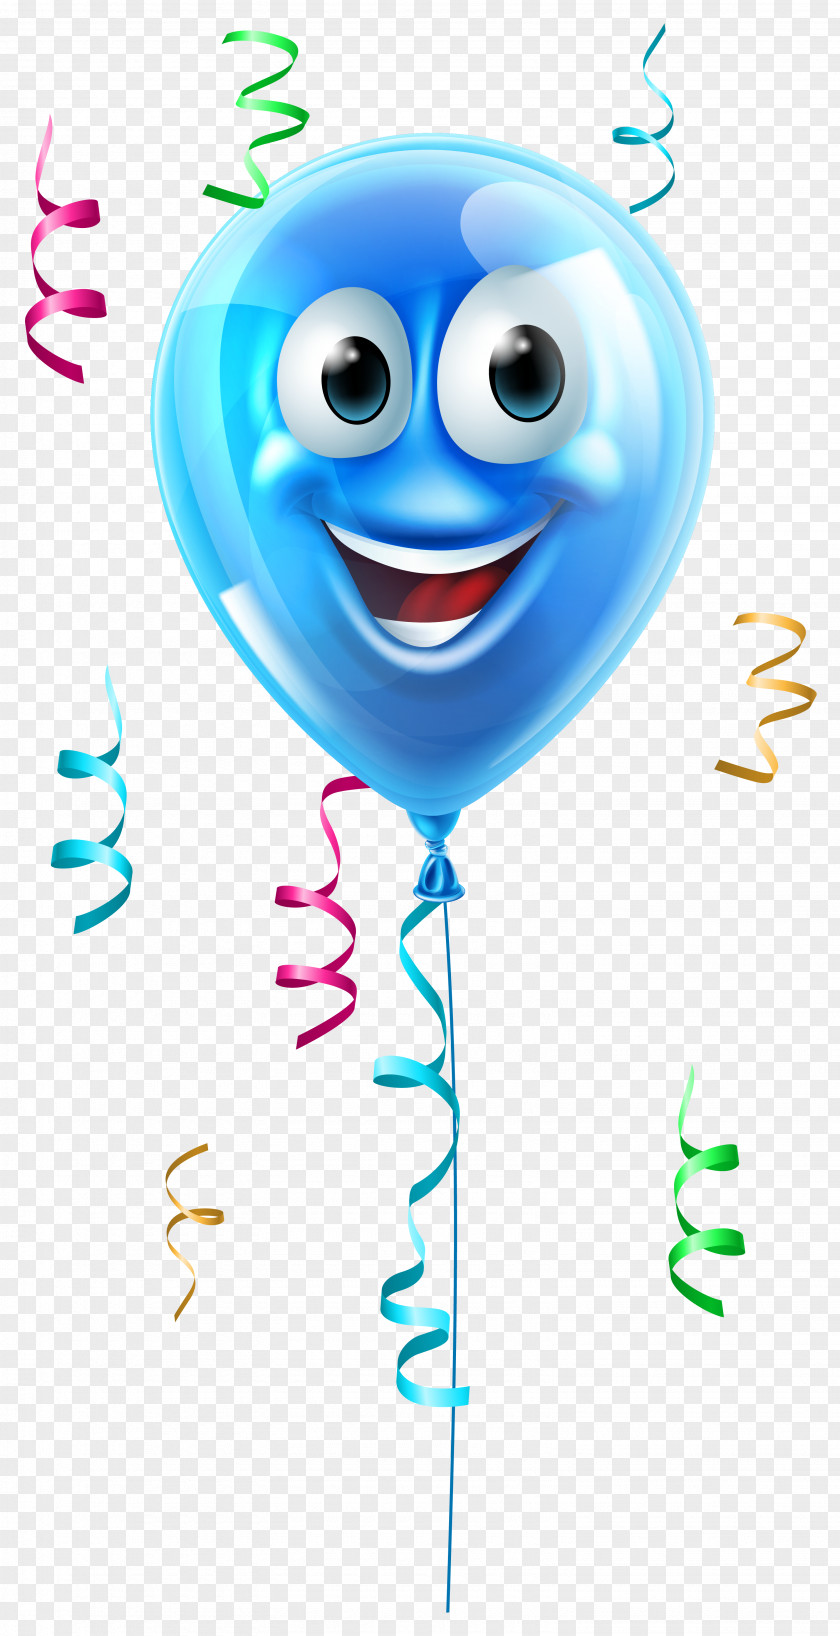 Balloon With Face Clipart Picture Icon PNG